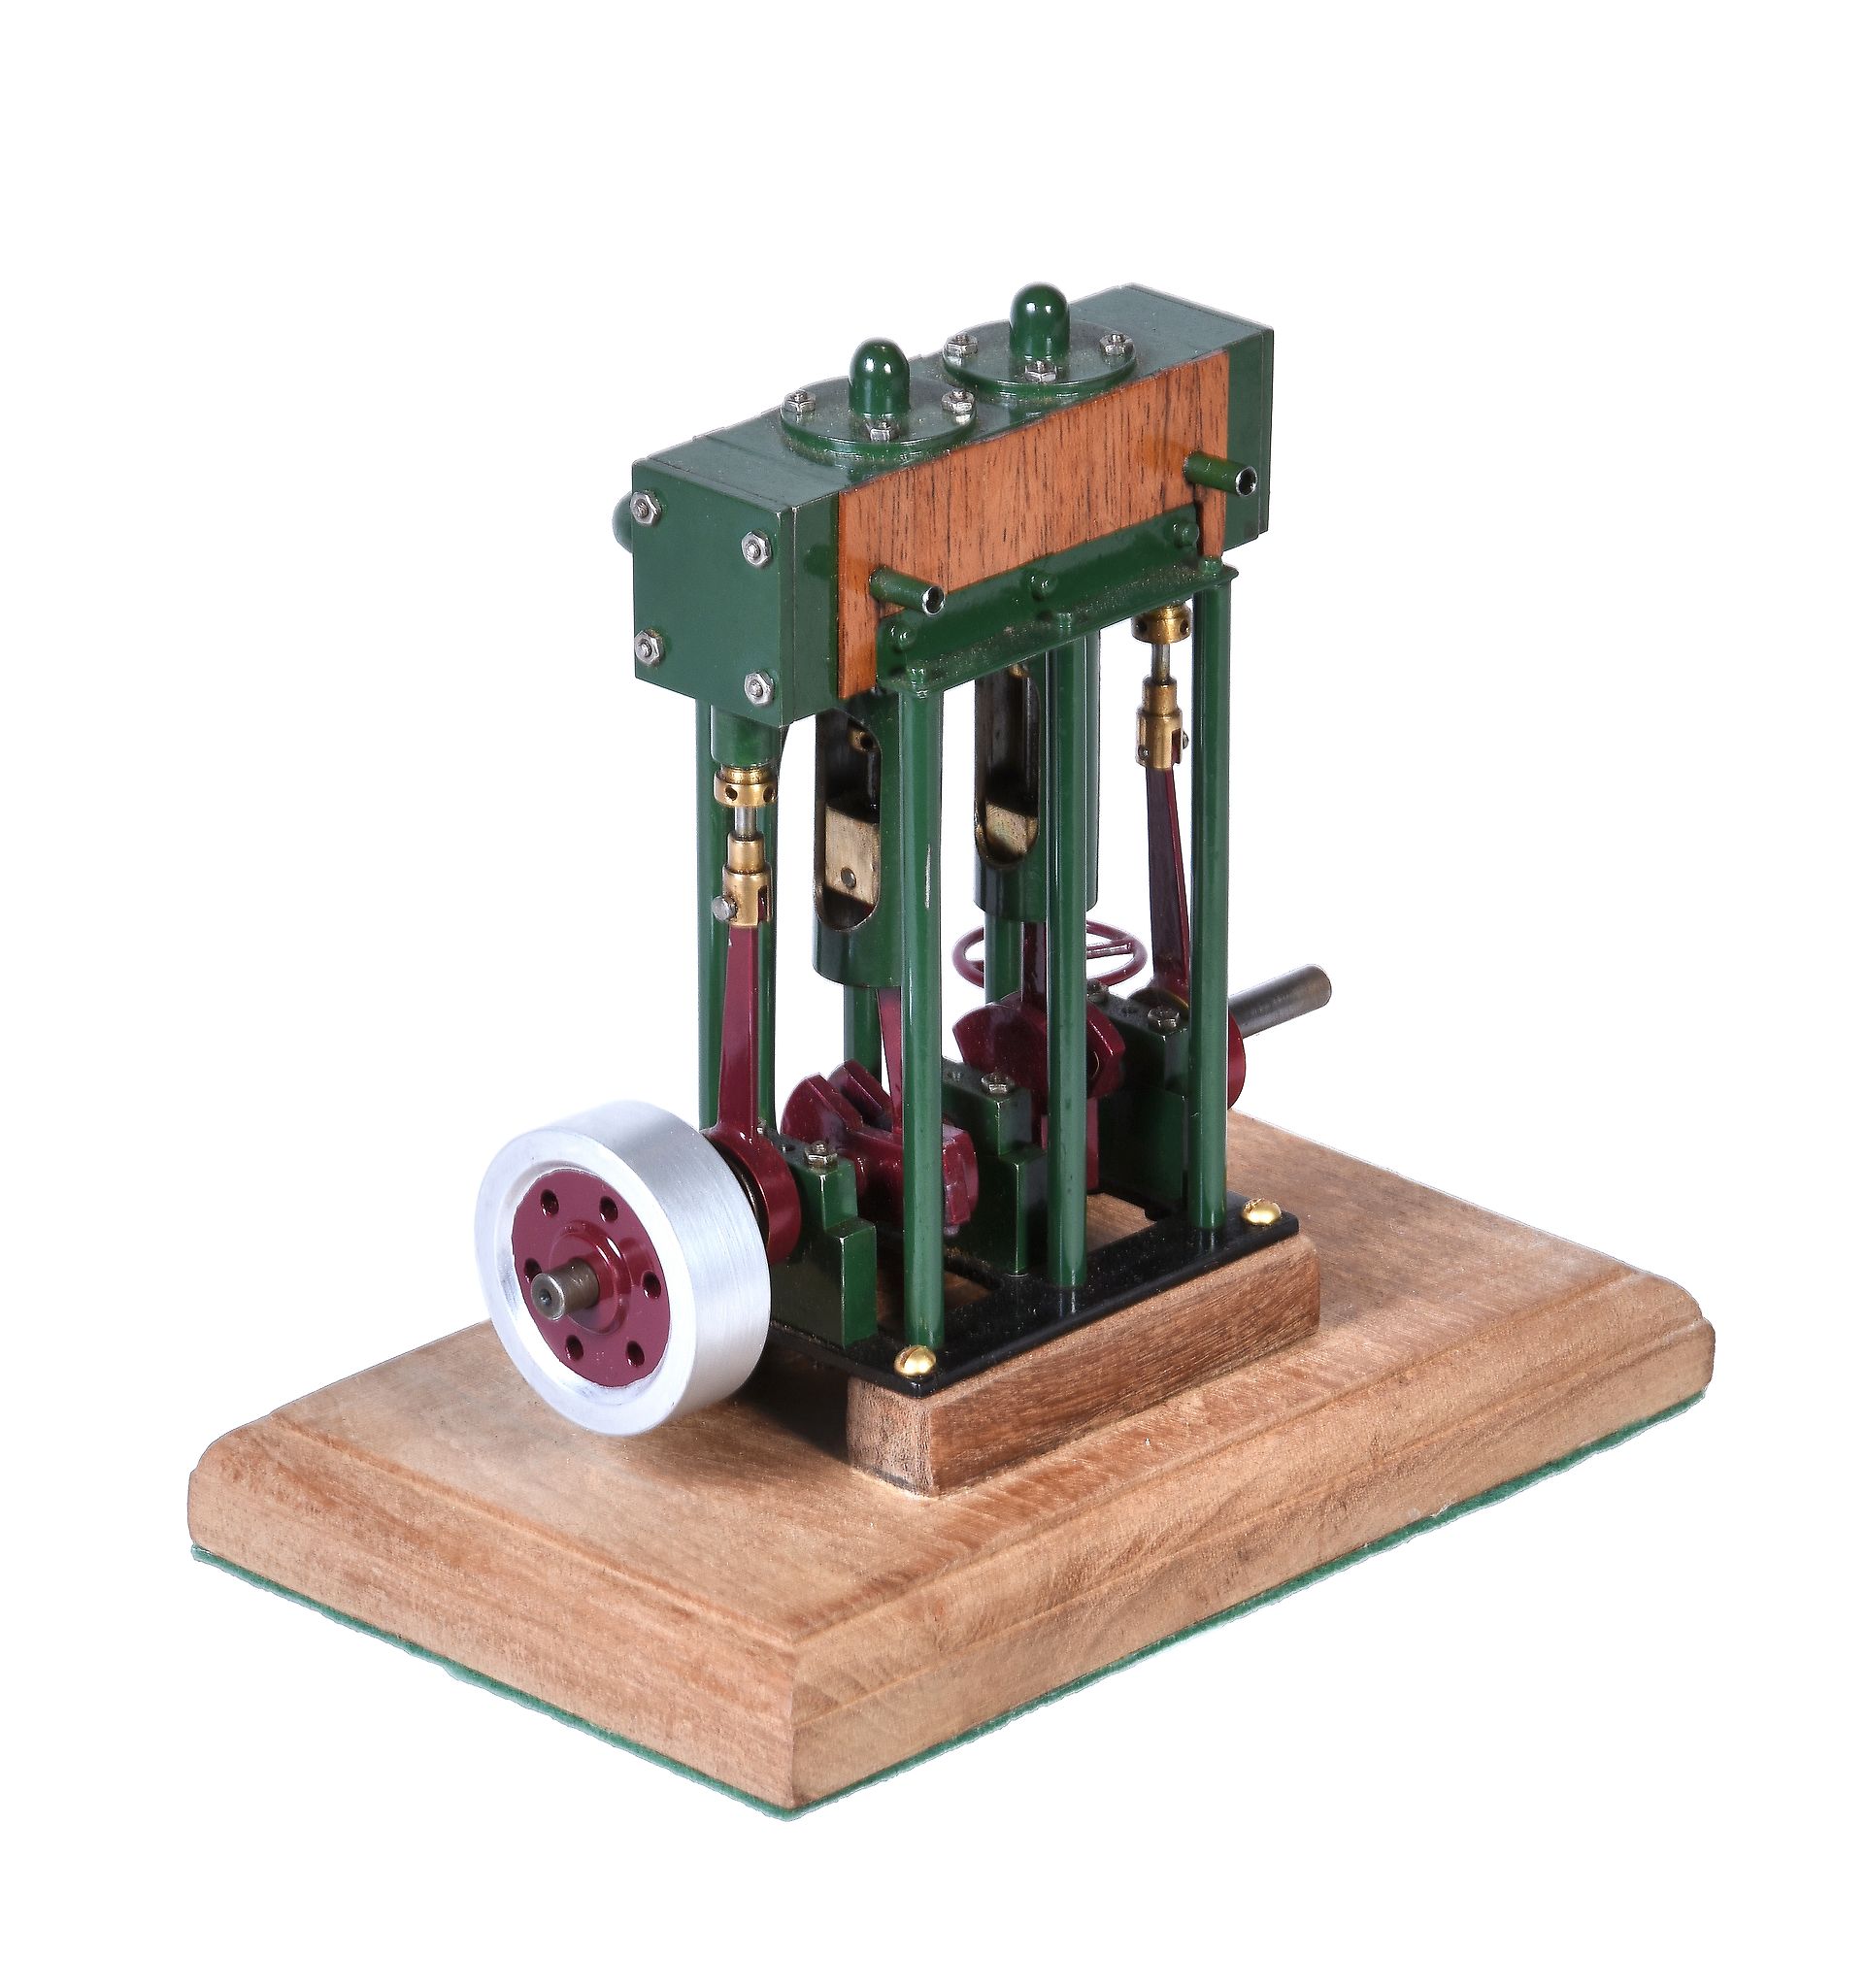 A small live steam twin simple vertical marine engine, built to the drawings by Rudy Kouhoupt with